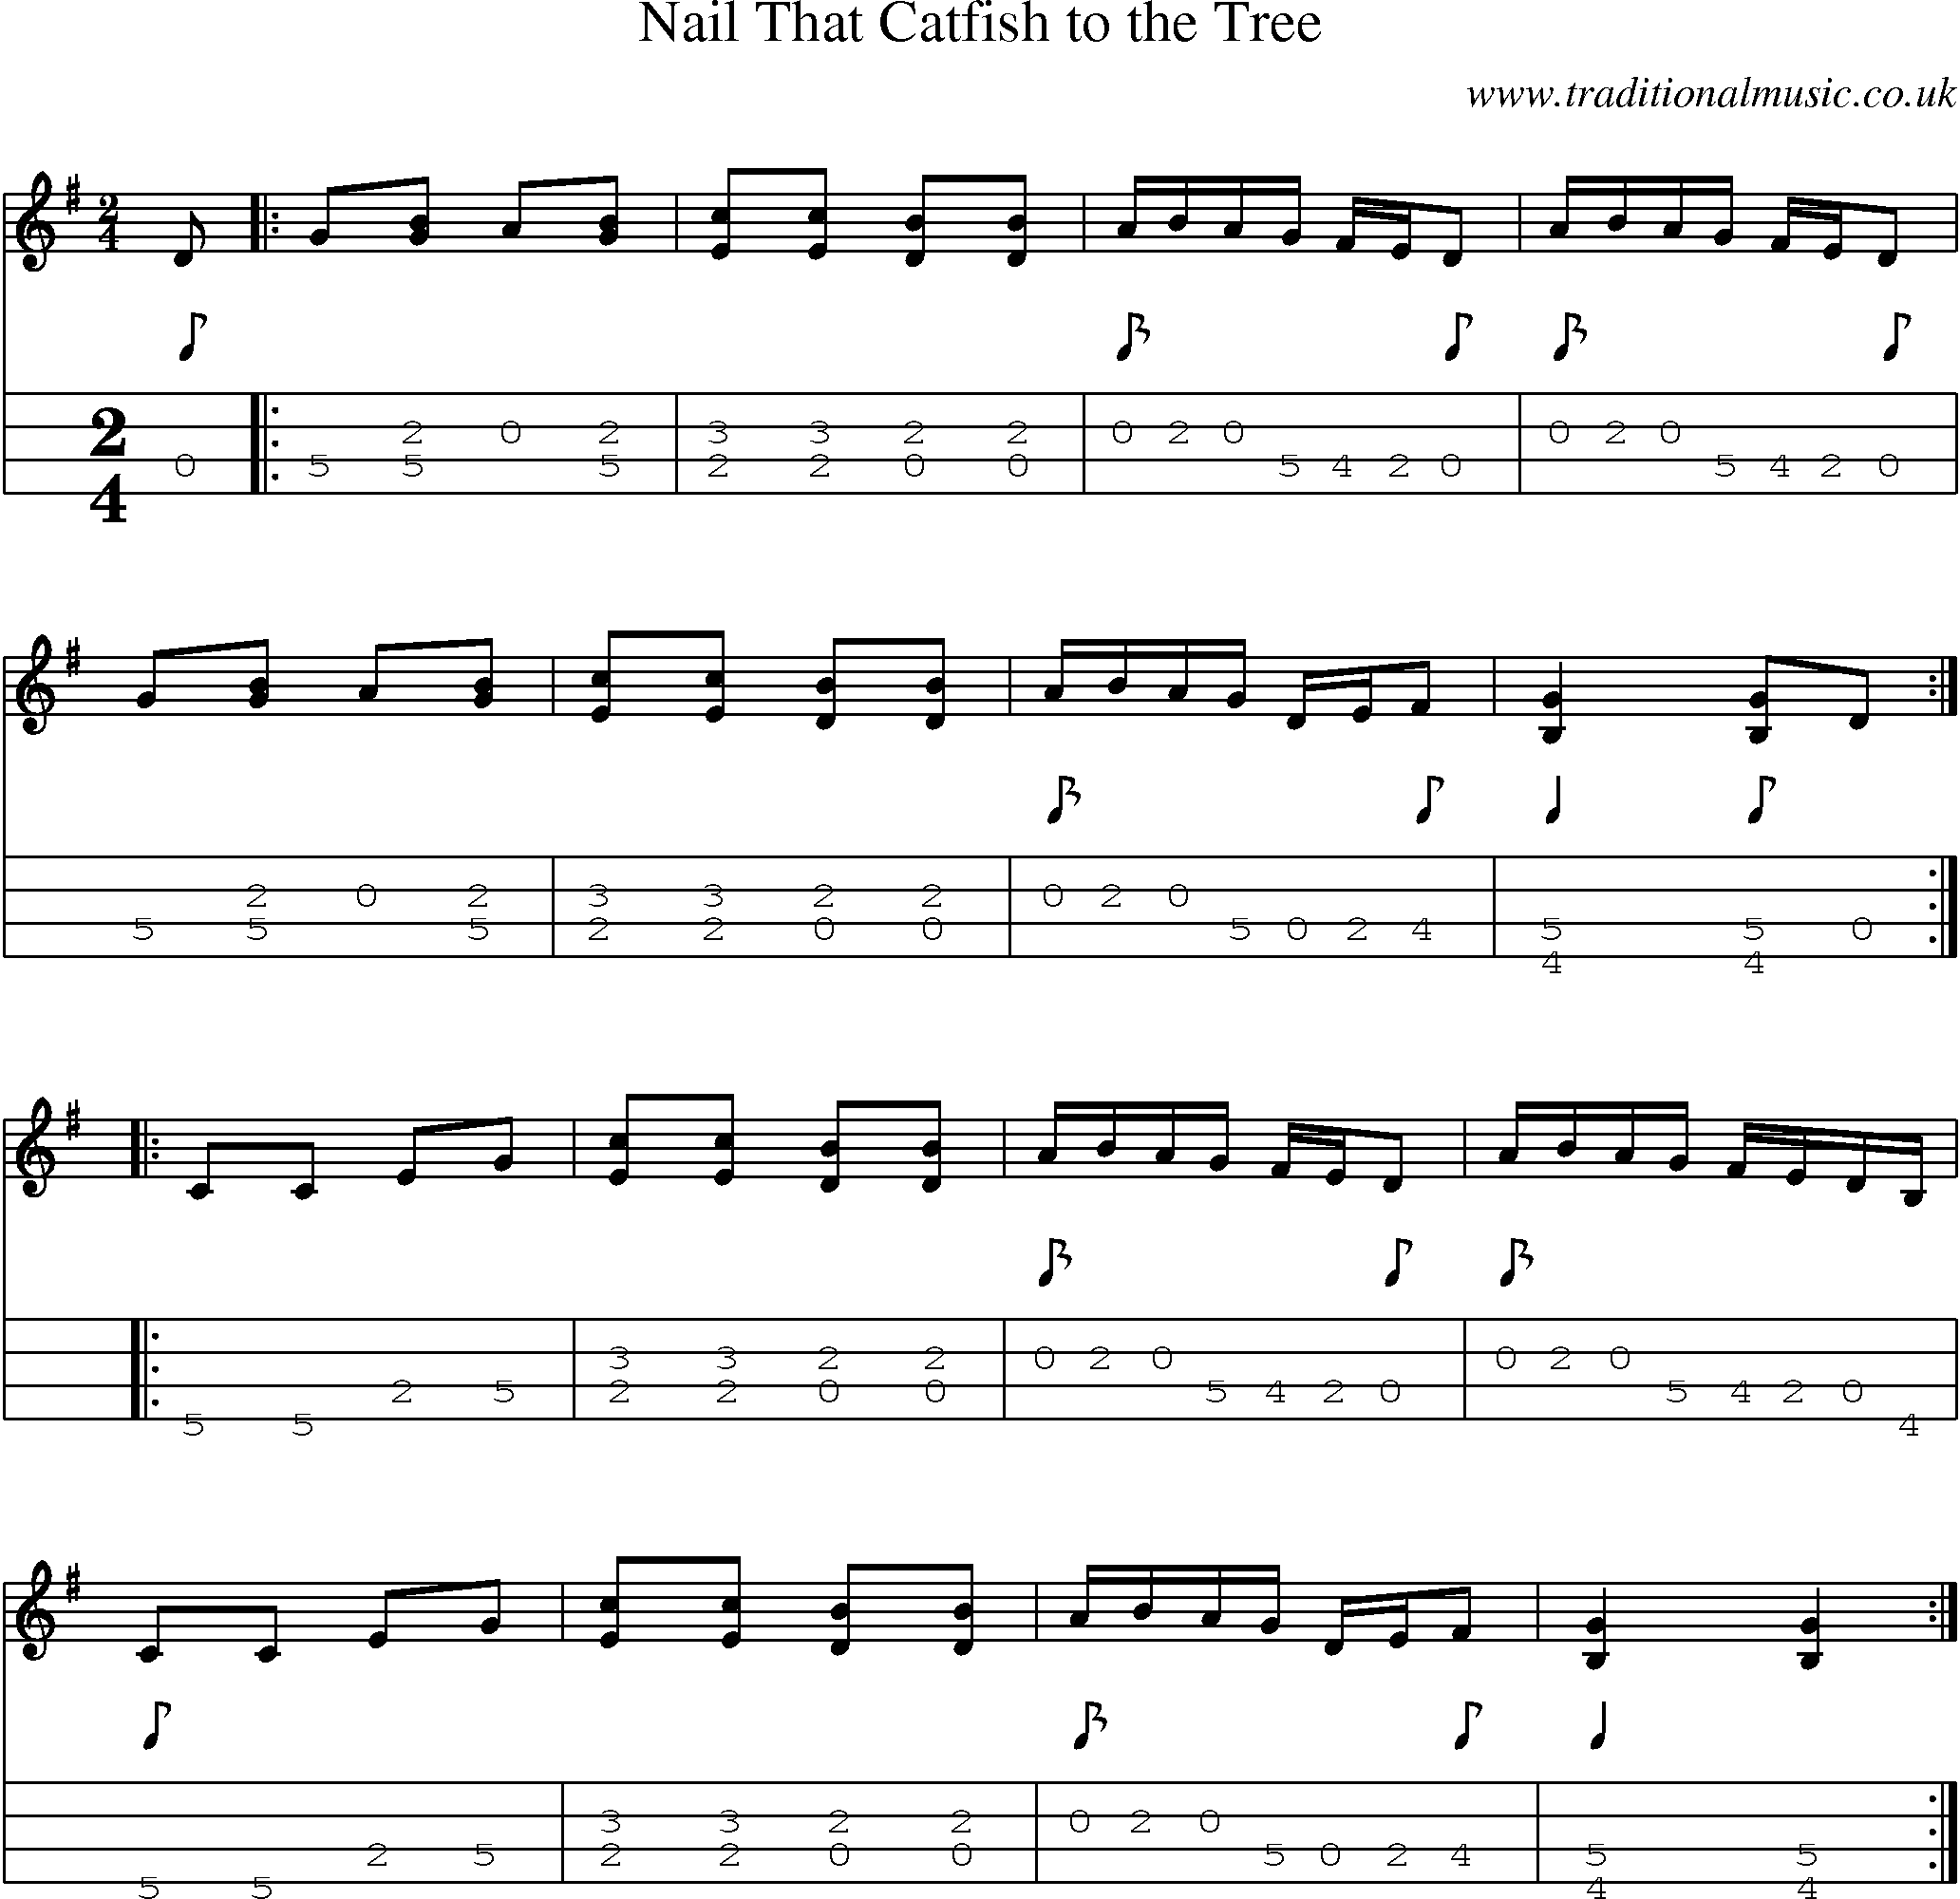 Music Score and Mandolin Tabs for Nail That Catfish To Tree